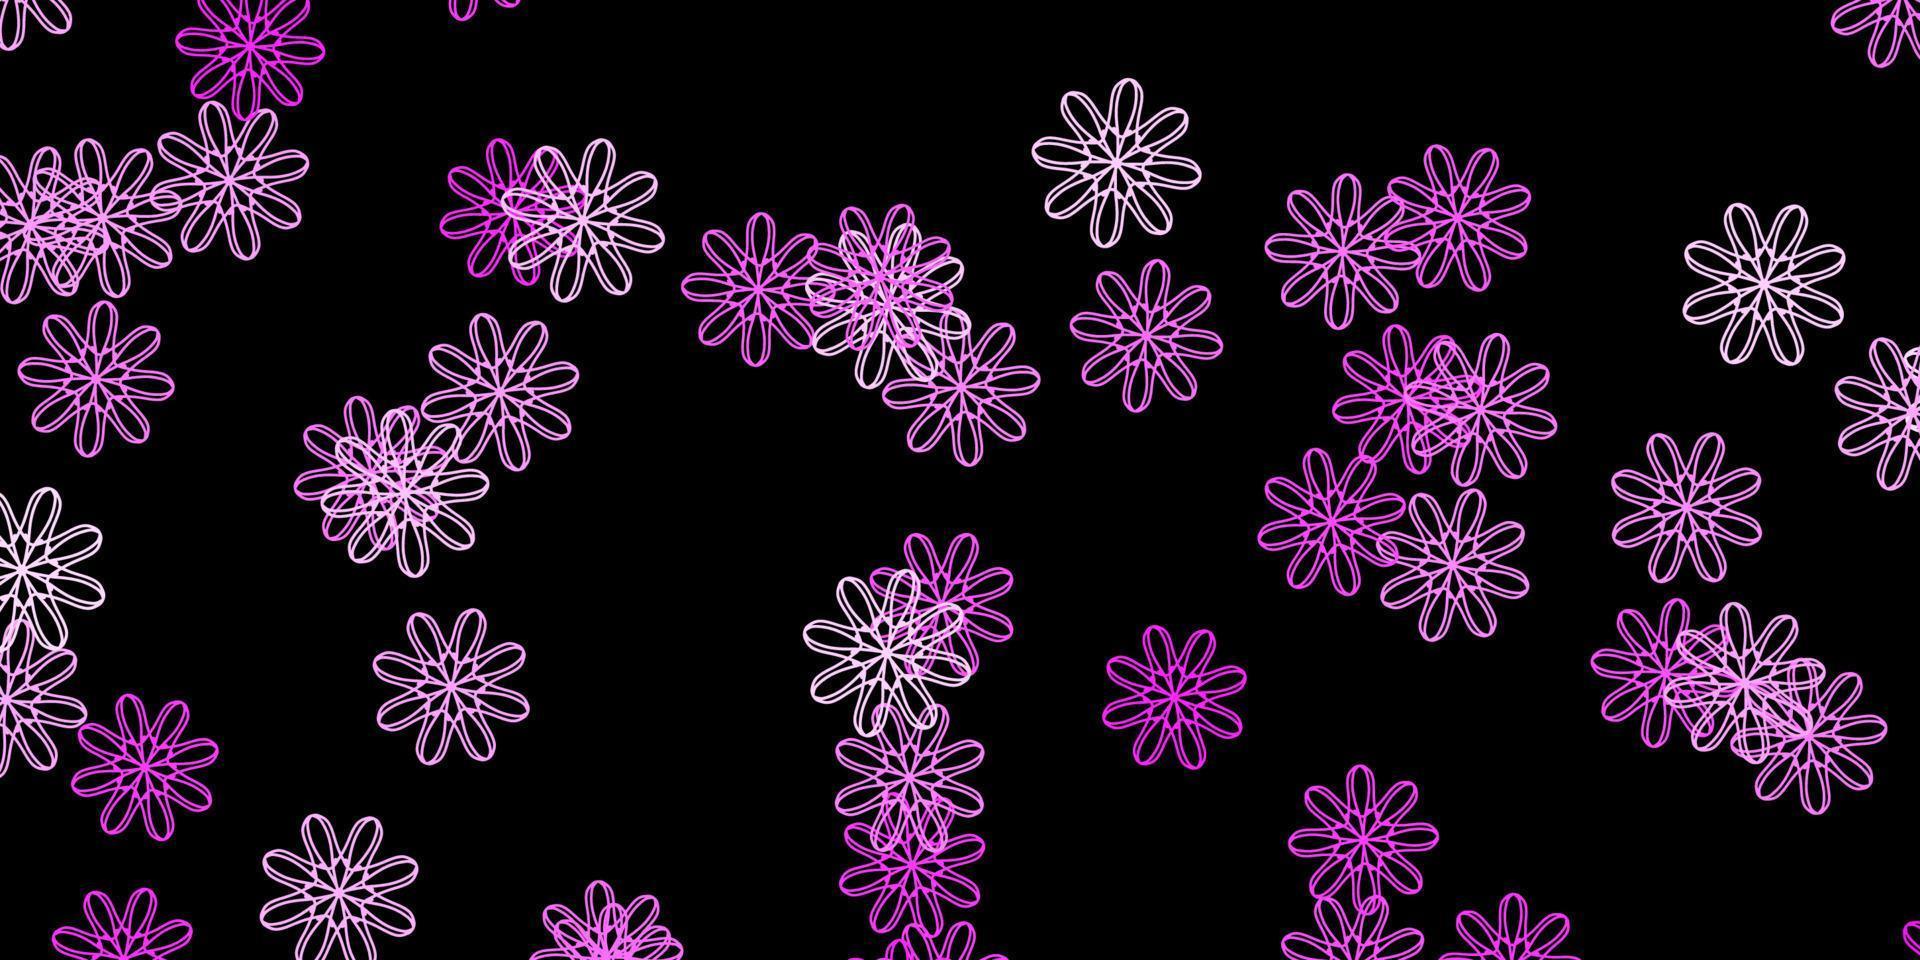 Dark Pink vector pattern with abstract shapes.